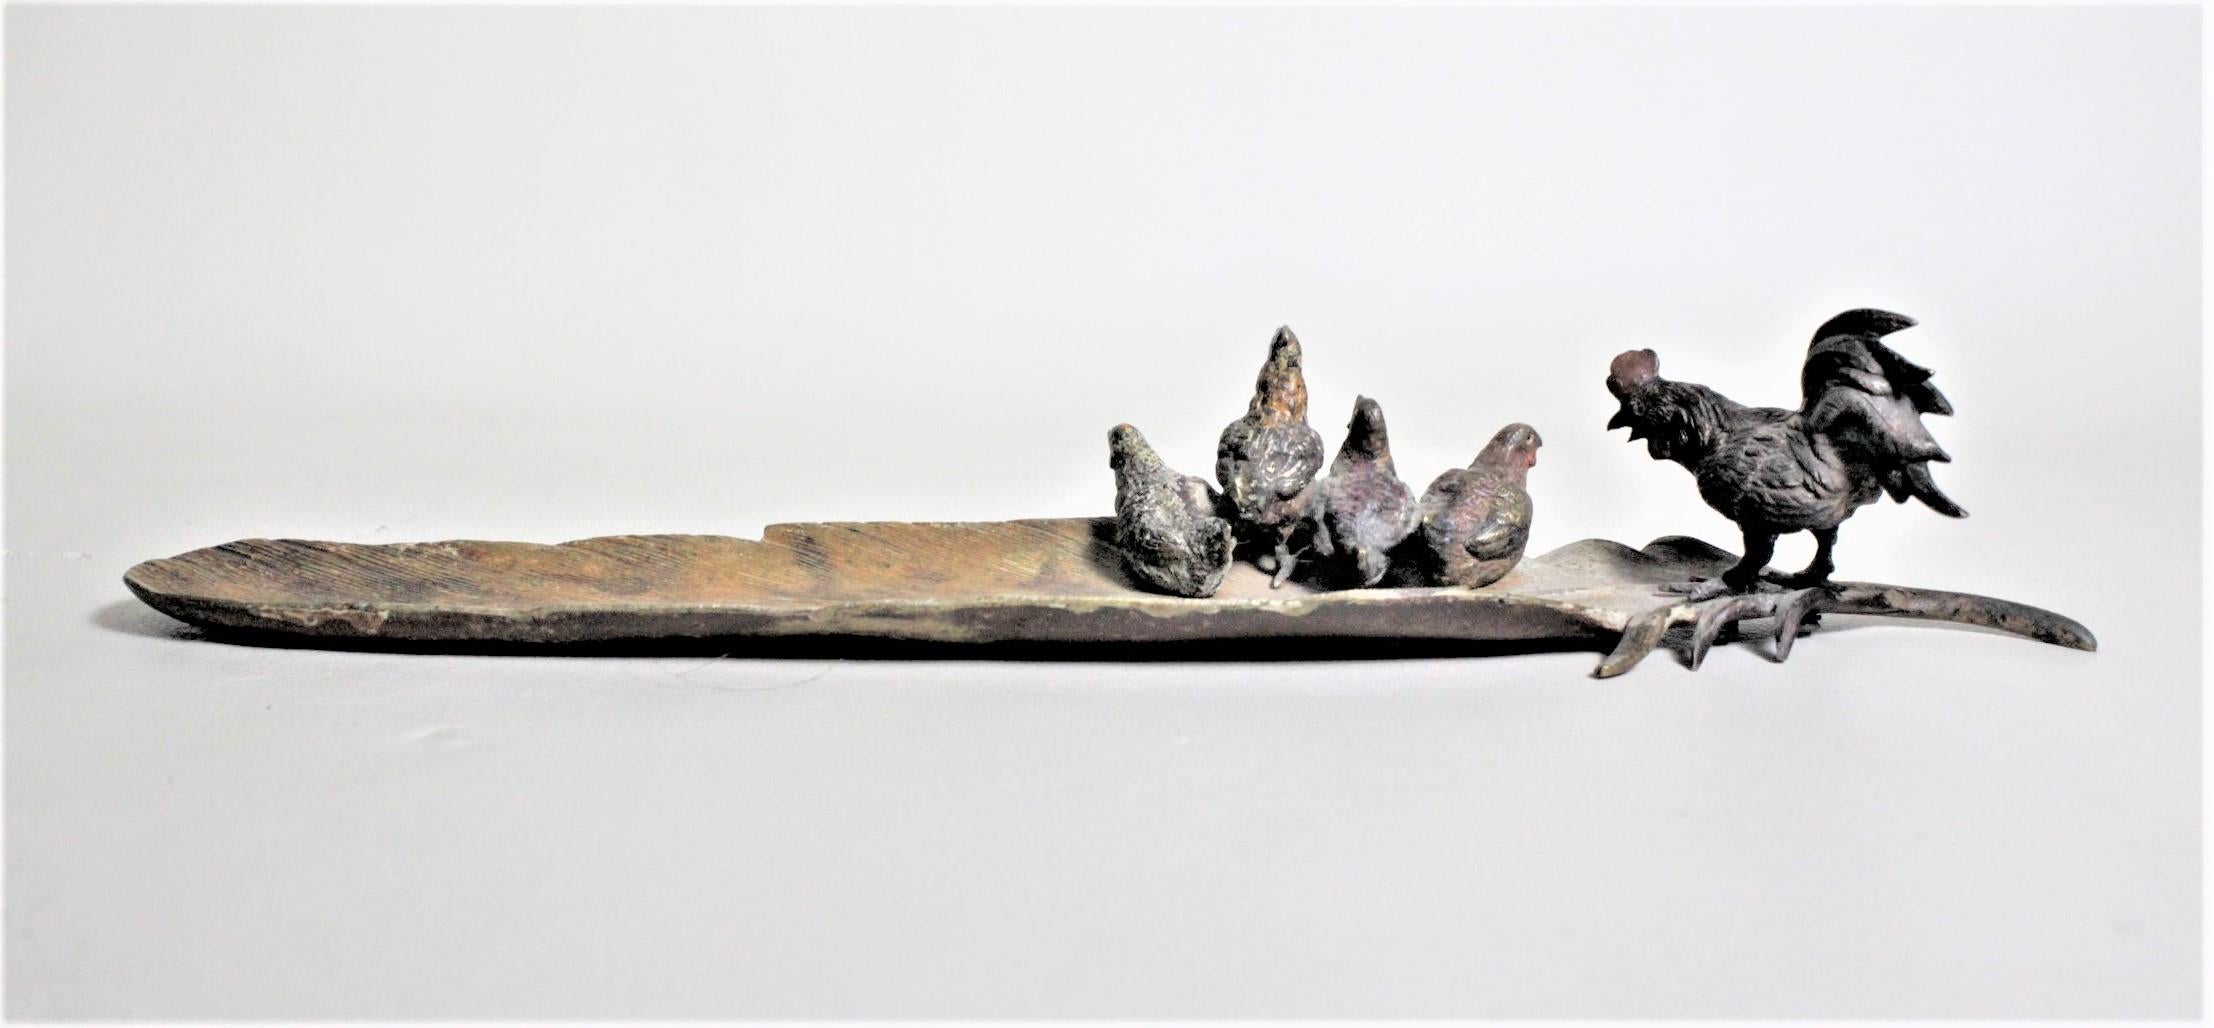 This antique cast and cold-painted bronze sculpture is unsigned but presumed to have been made in Austria in circa 1920. This well executed cast bronze study depicts several hens perched on a tobacco leaf and being overseen by a rooster. The casting